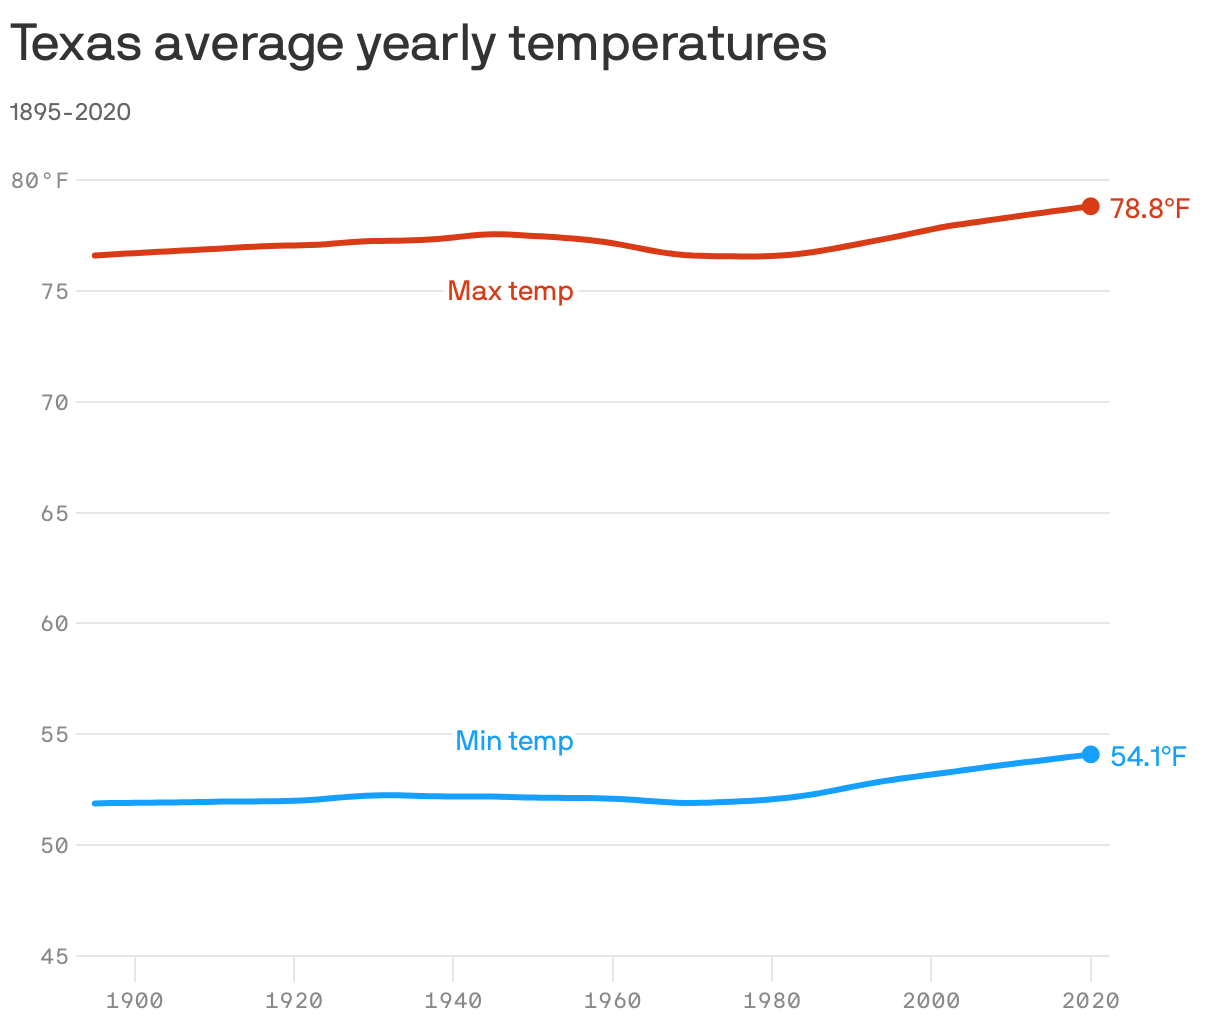 Texas average yearly temperatures